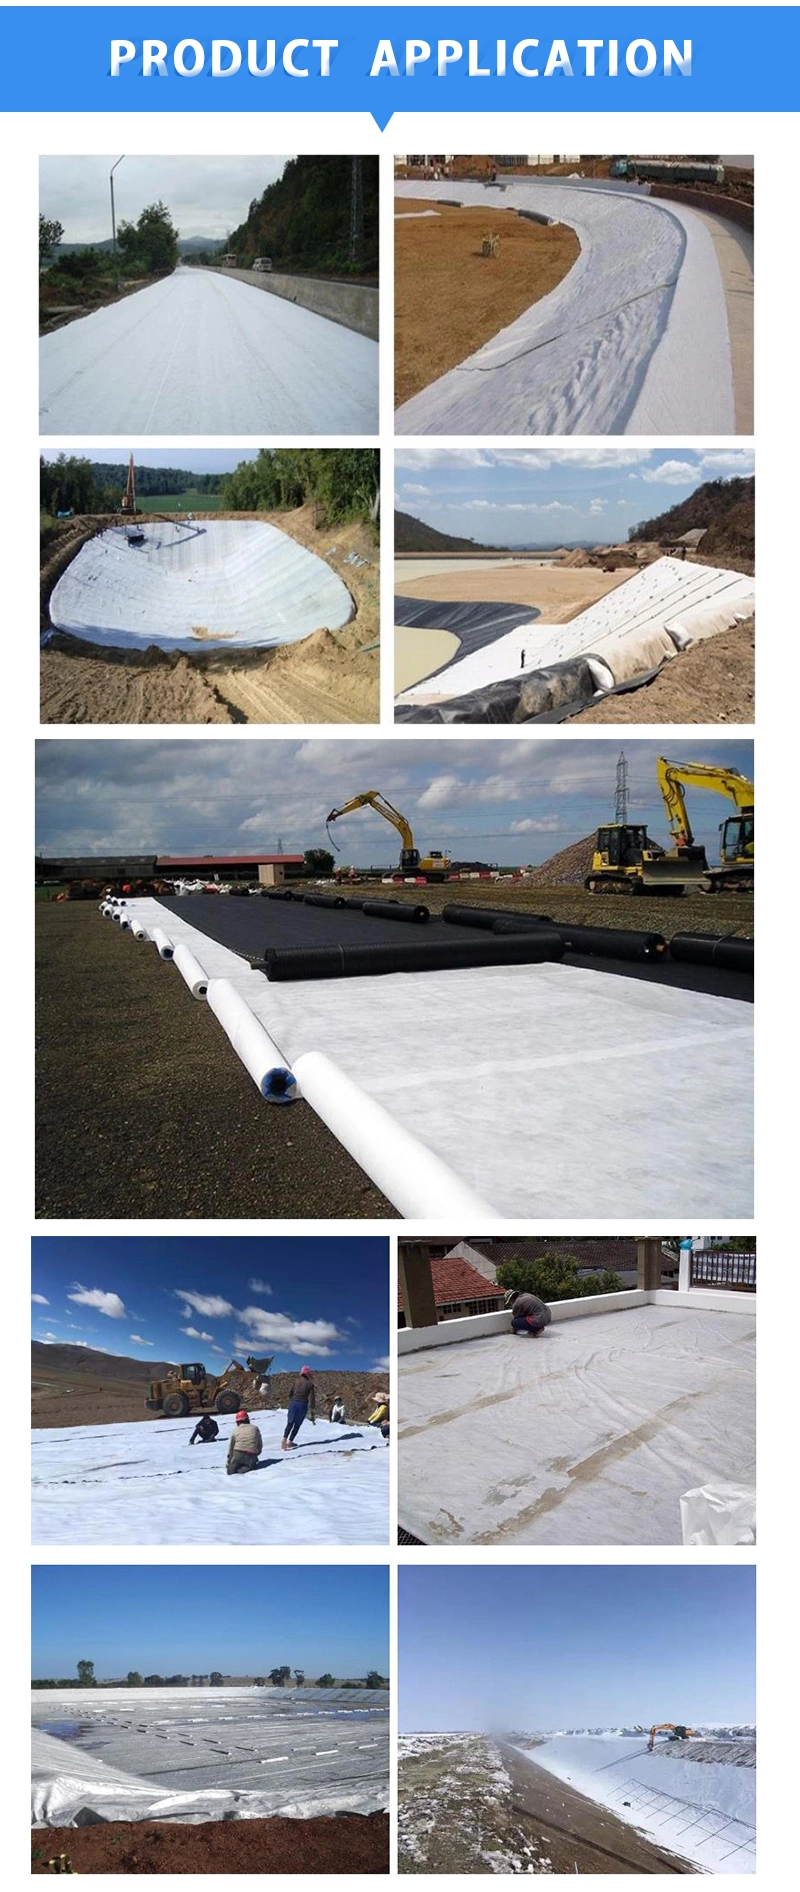 350g M2 Nonwoven Waterproof Recycled Geotextile for Floor Mat